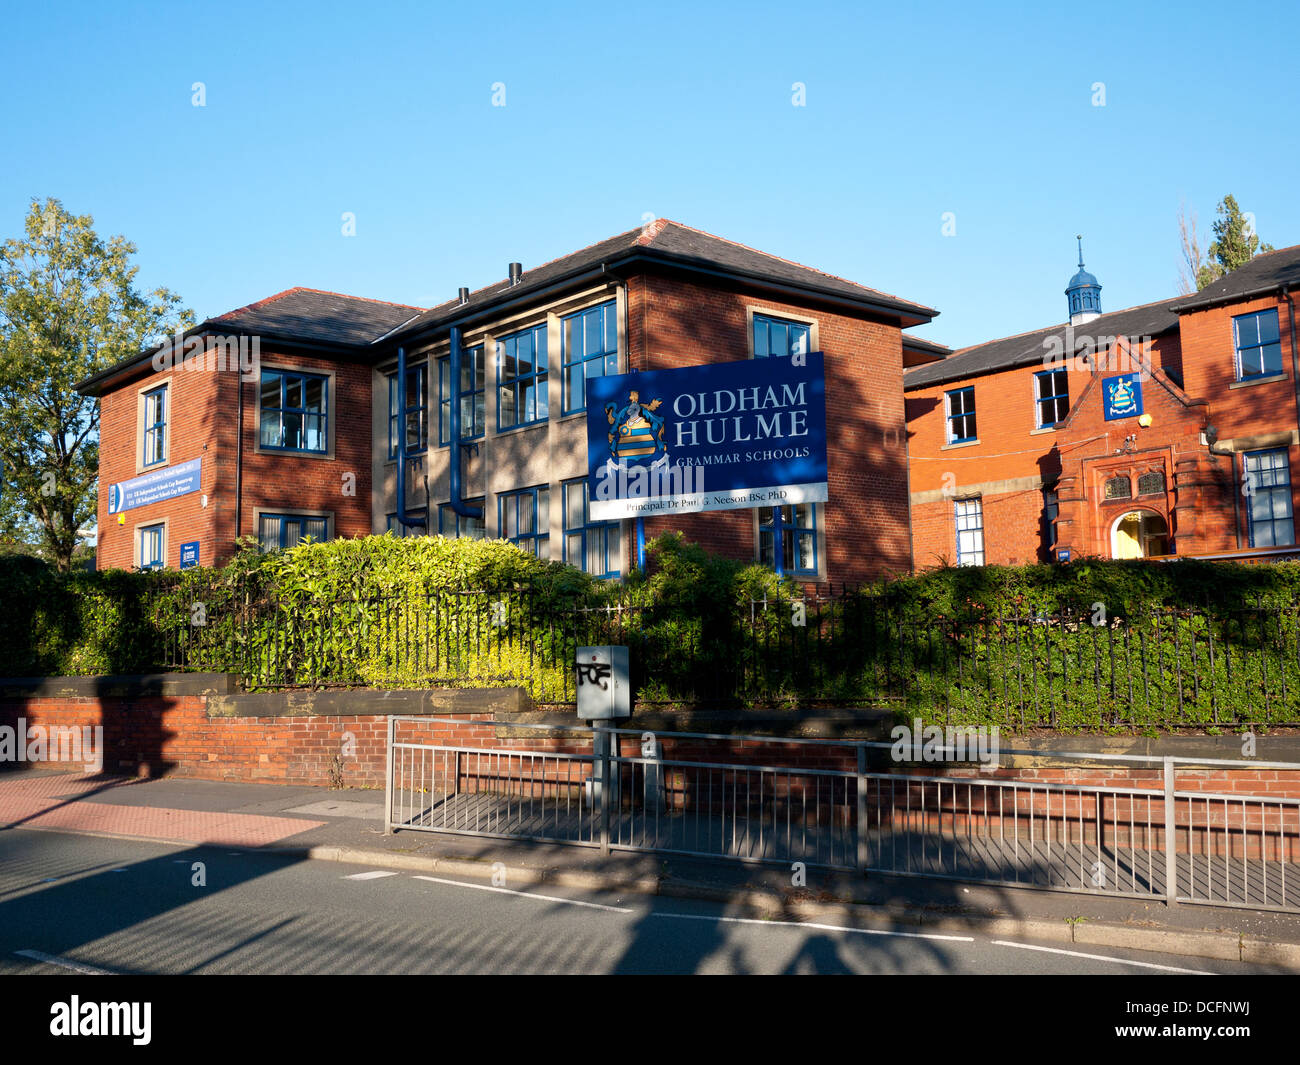 Hulme Grammer School, Oldham, Greater Manchester, UK. Stock Photo